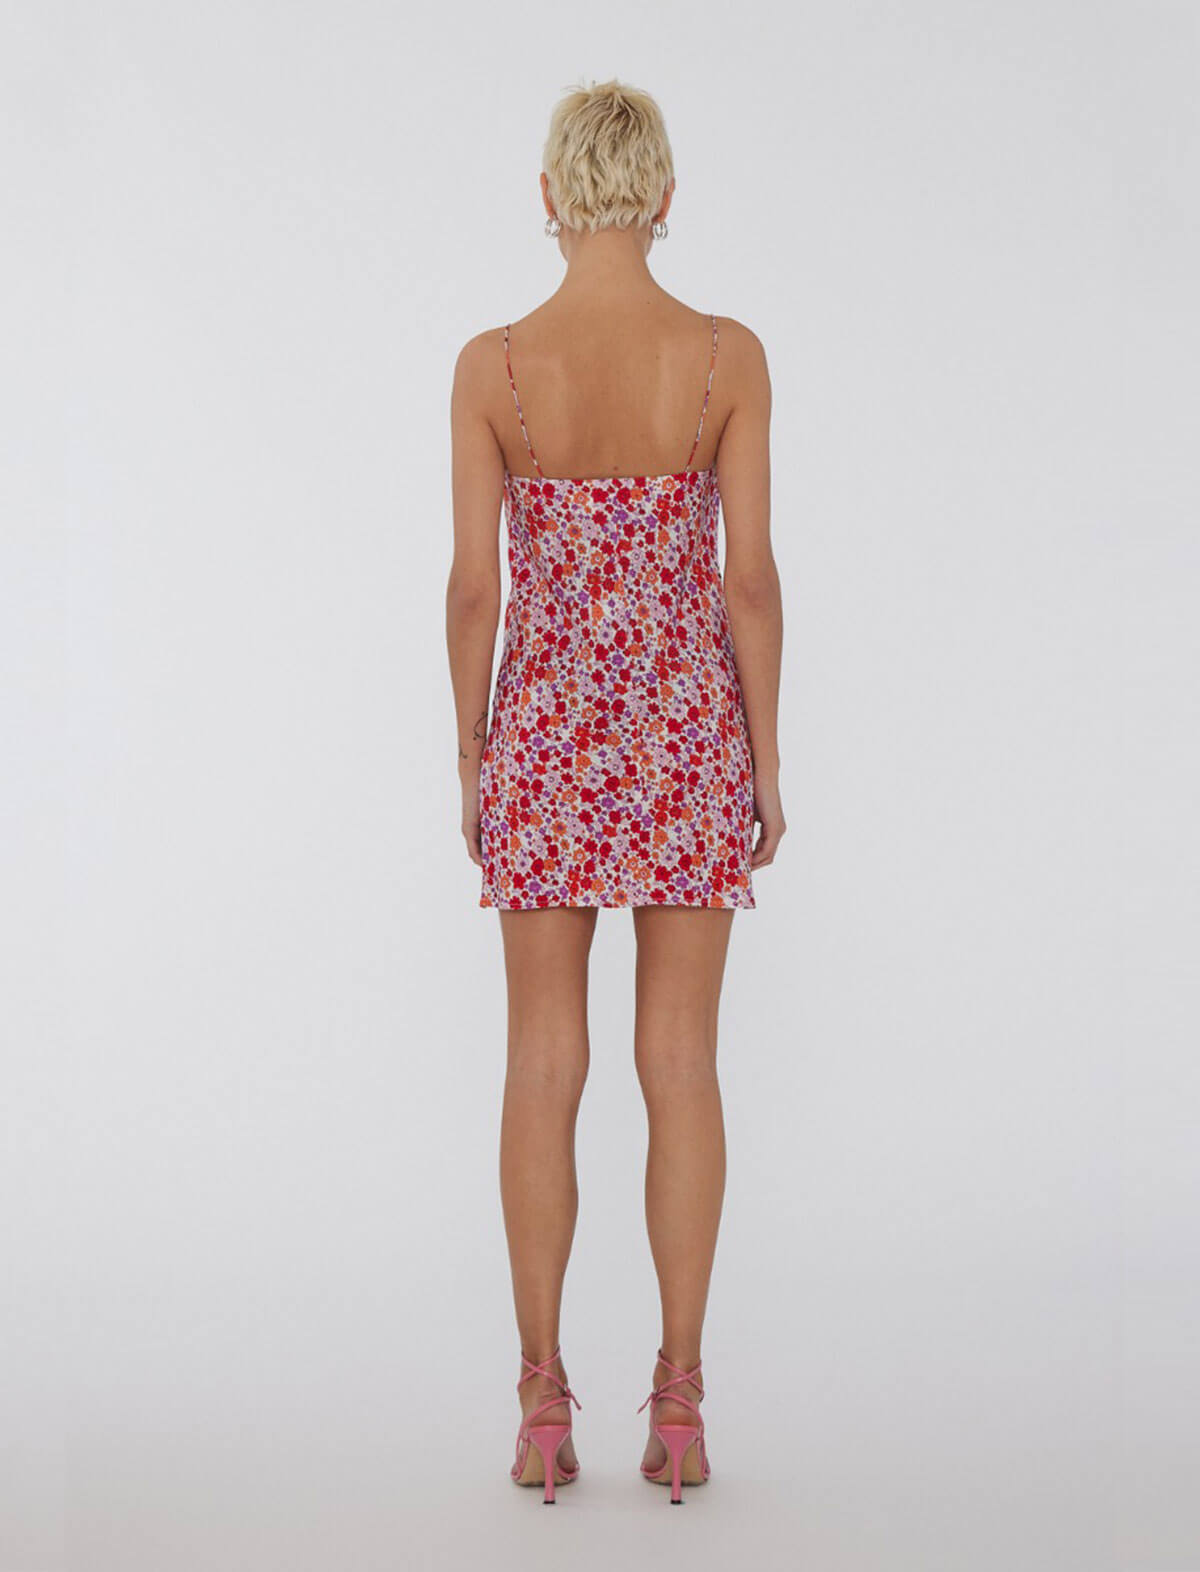 ROTATE SUNDAY 6 Jacquard Mini Dress in Red Floral Print